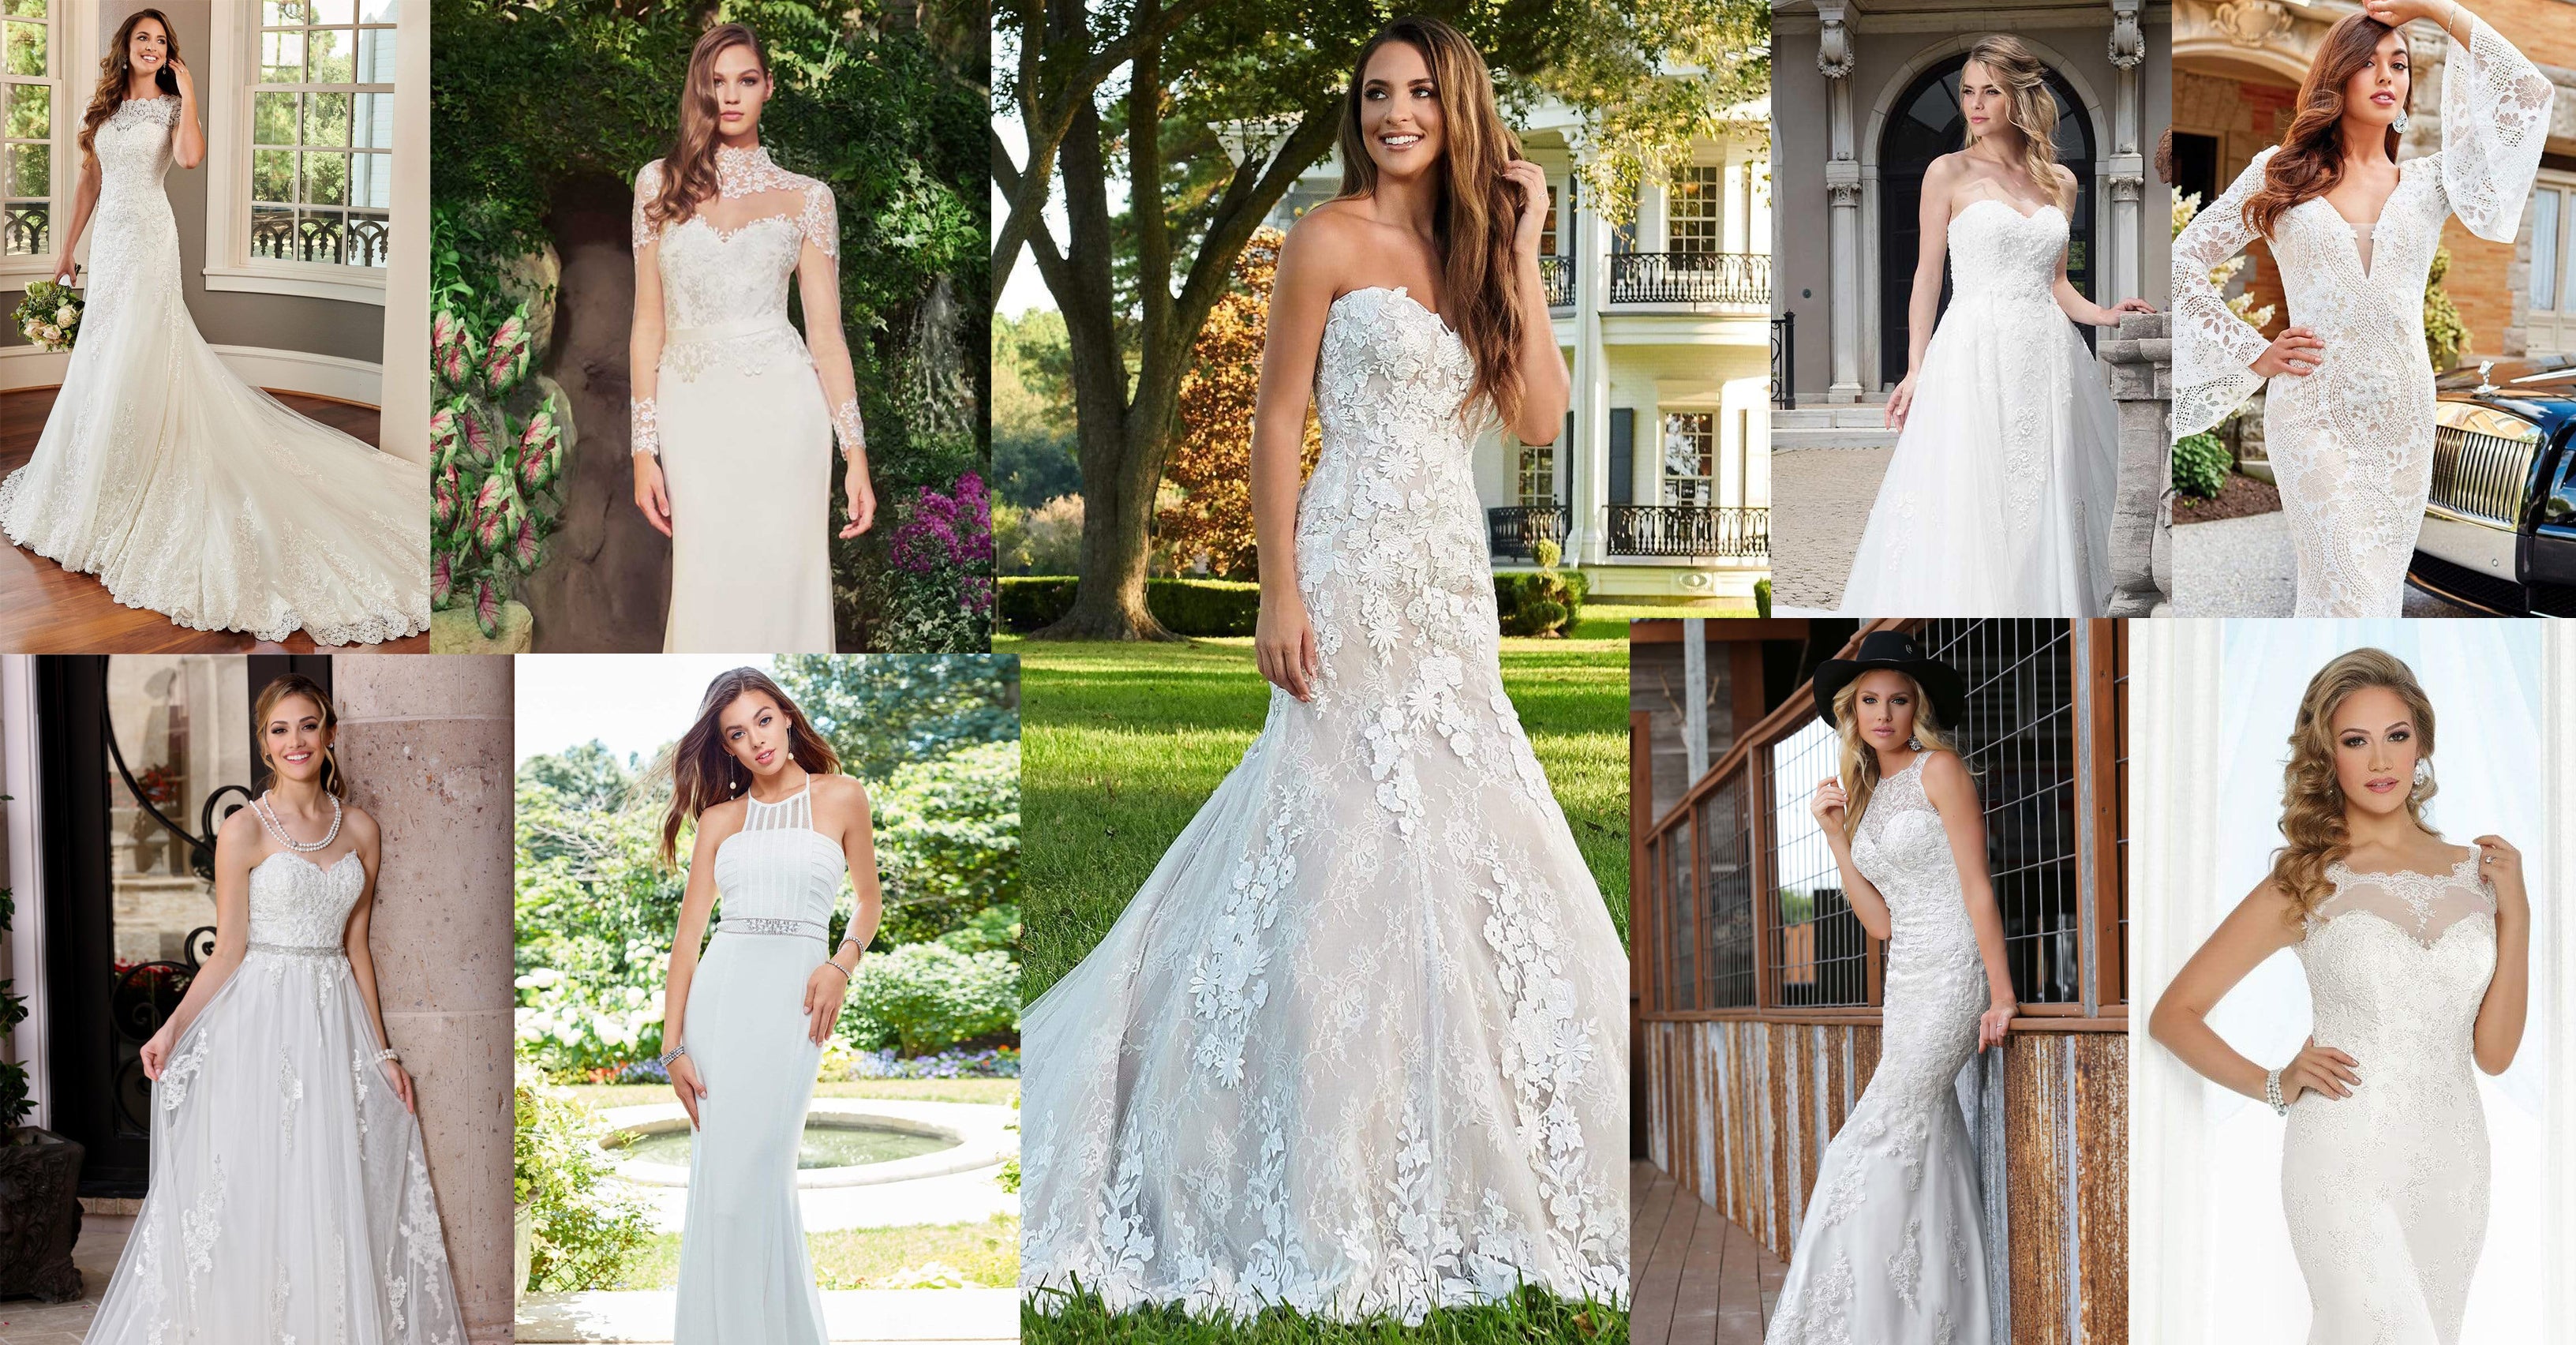 How To Shop And Style A Wedding Dress | A Guide For A Bride